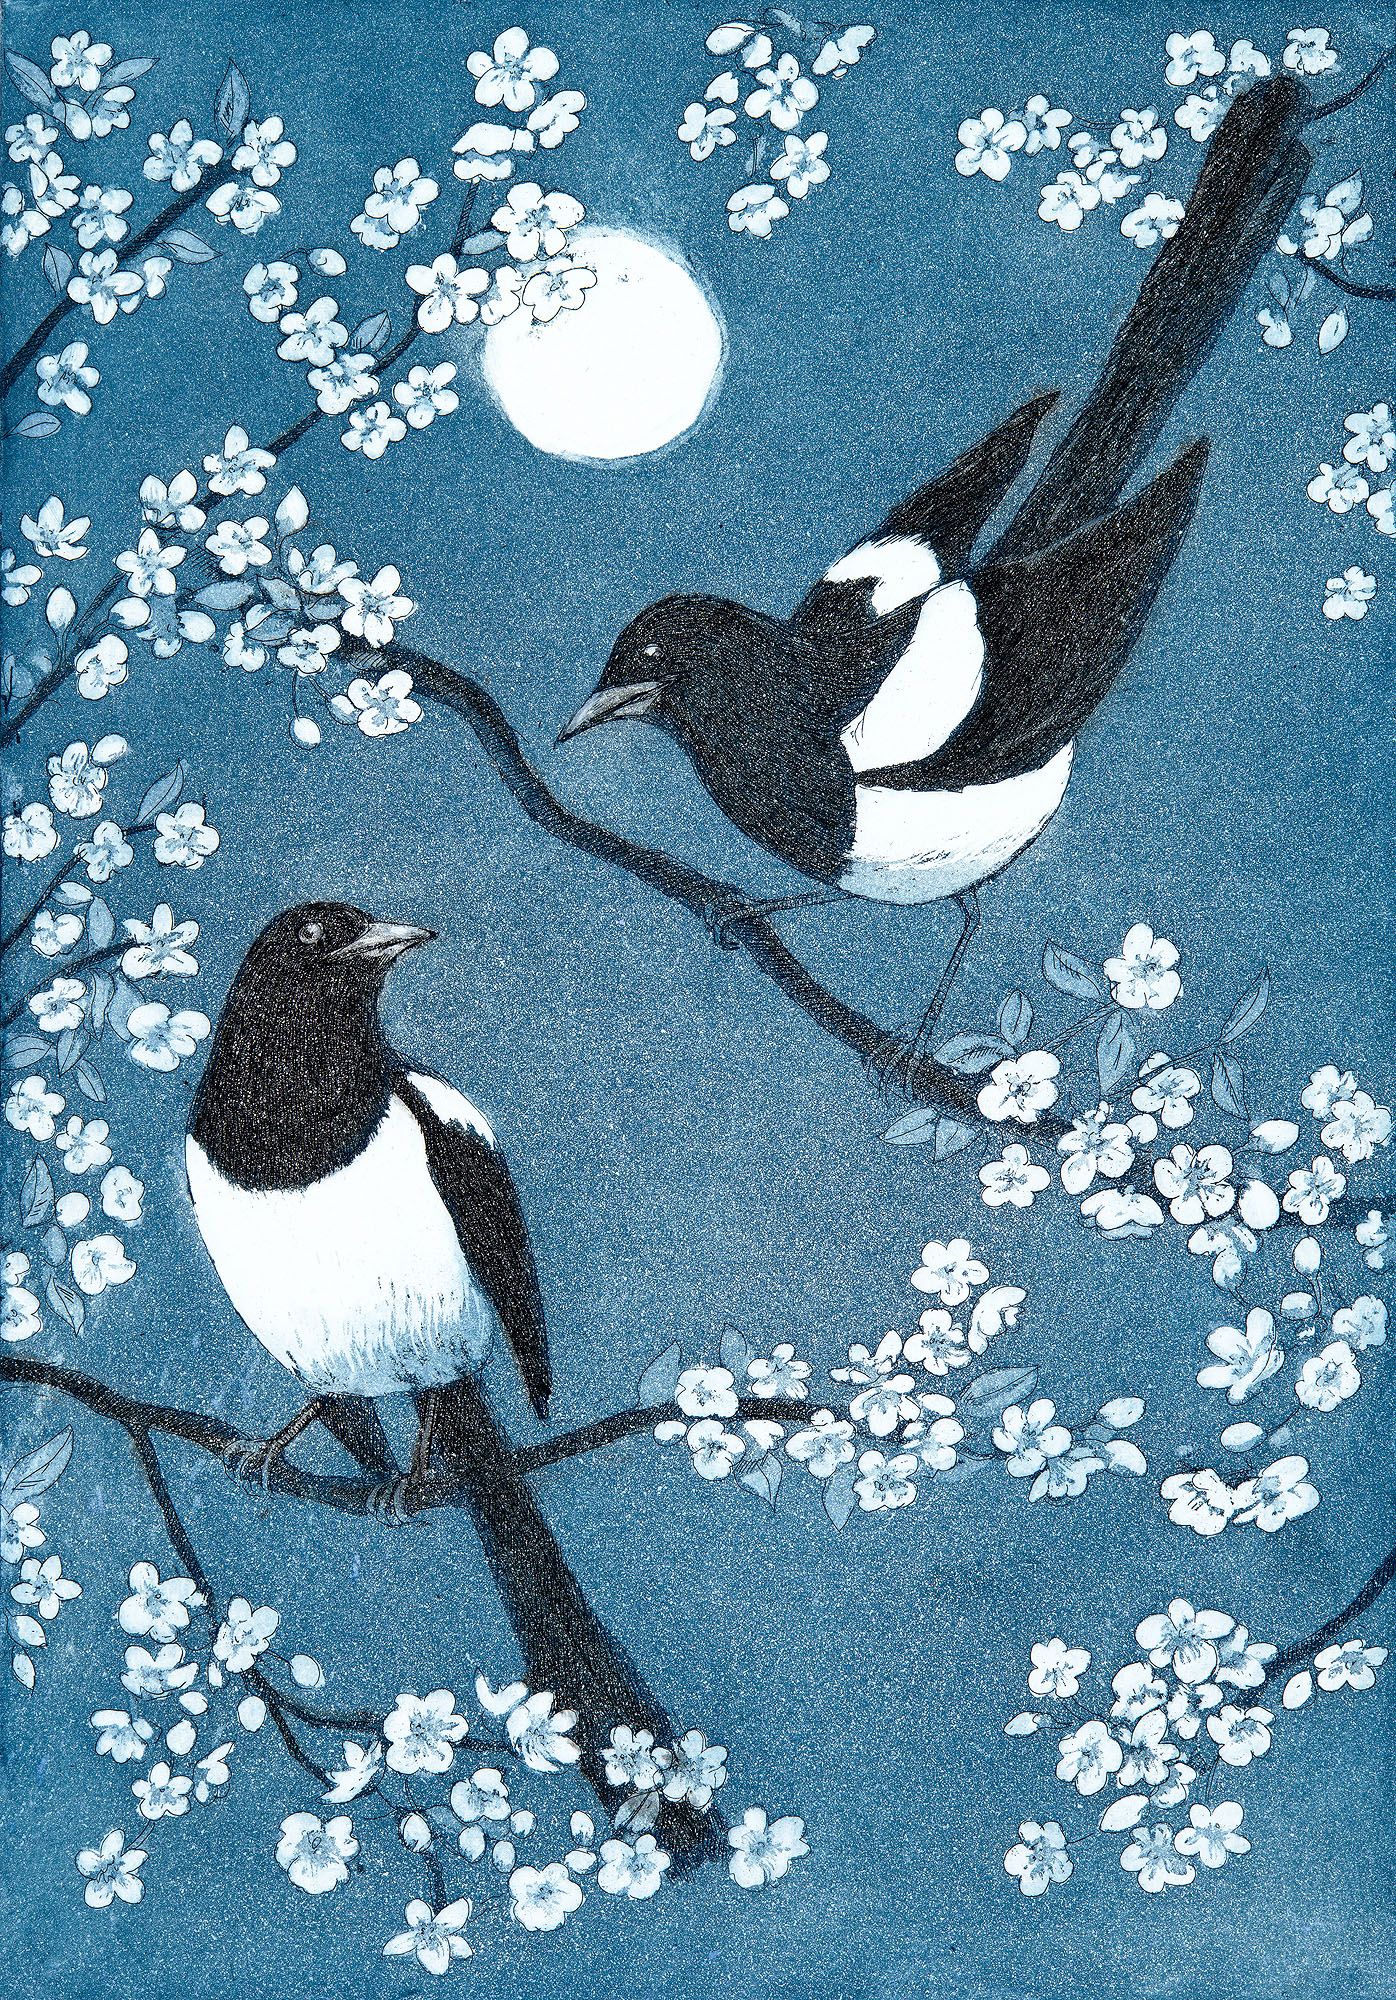 Moonlit Magpies by Jane Peart